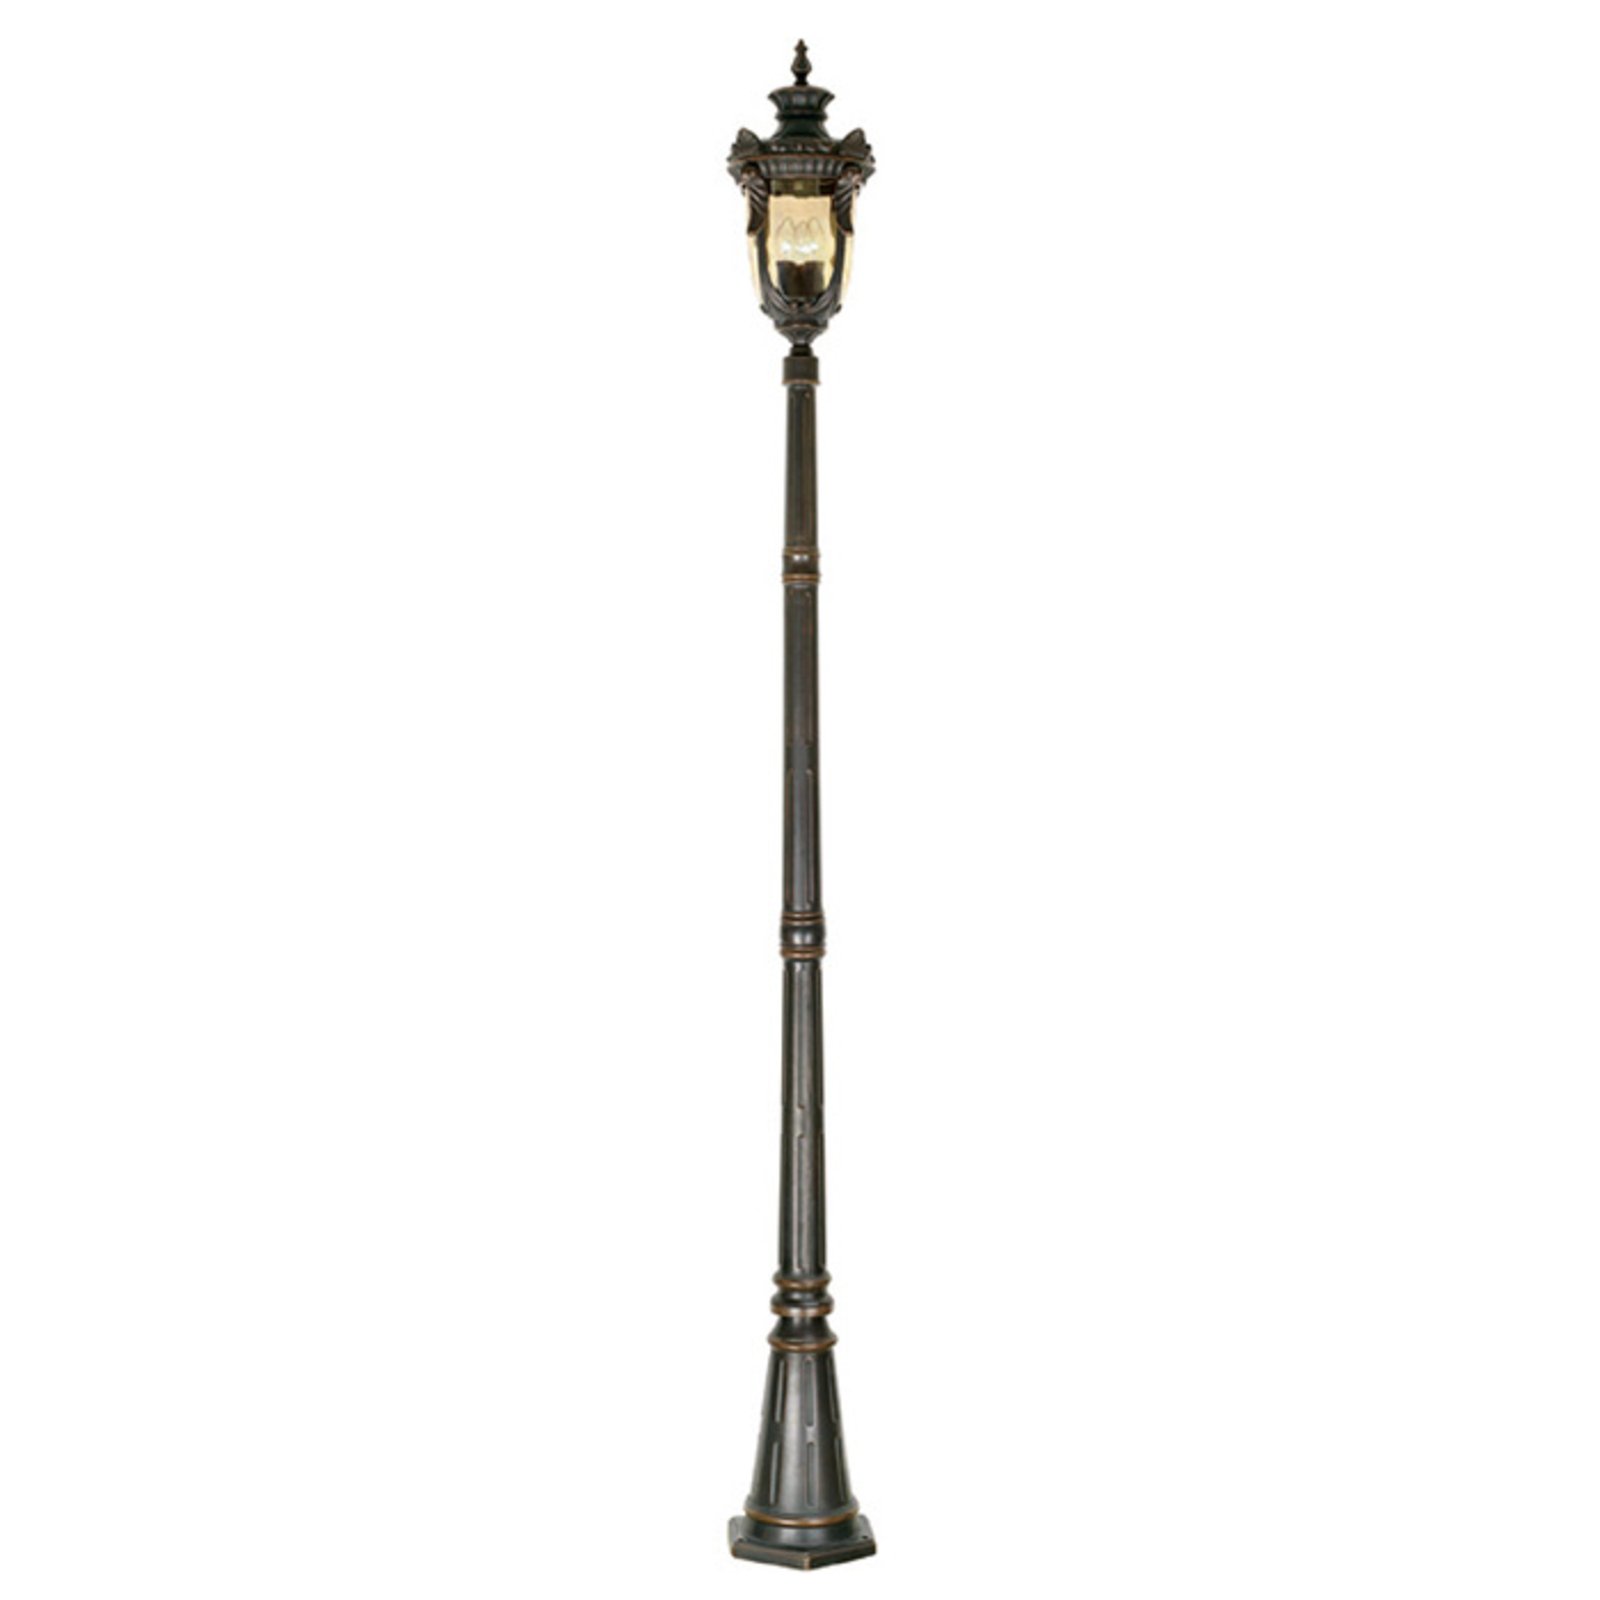 Philadelphia lamp post in the style of the 1900s